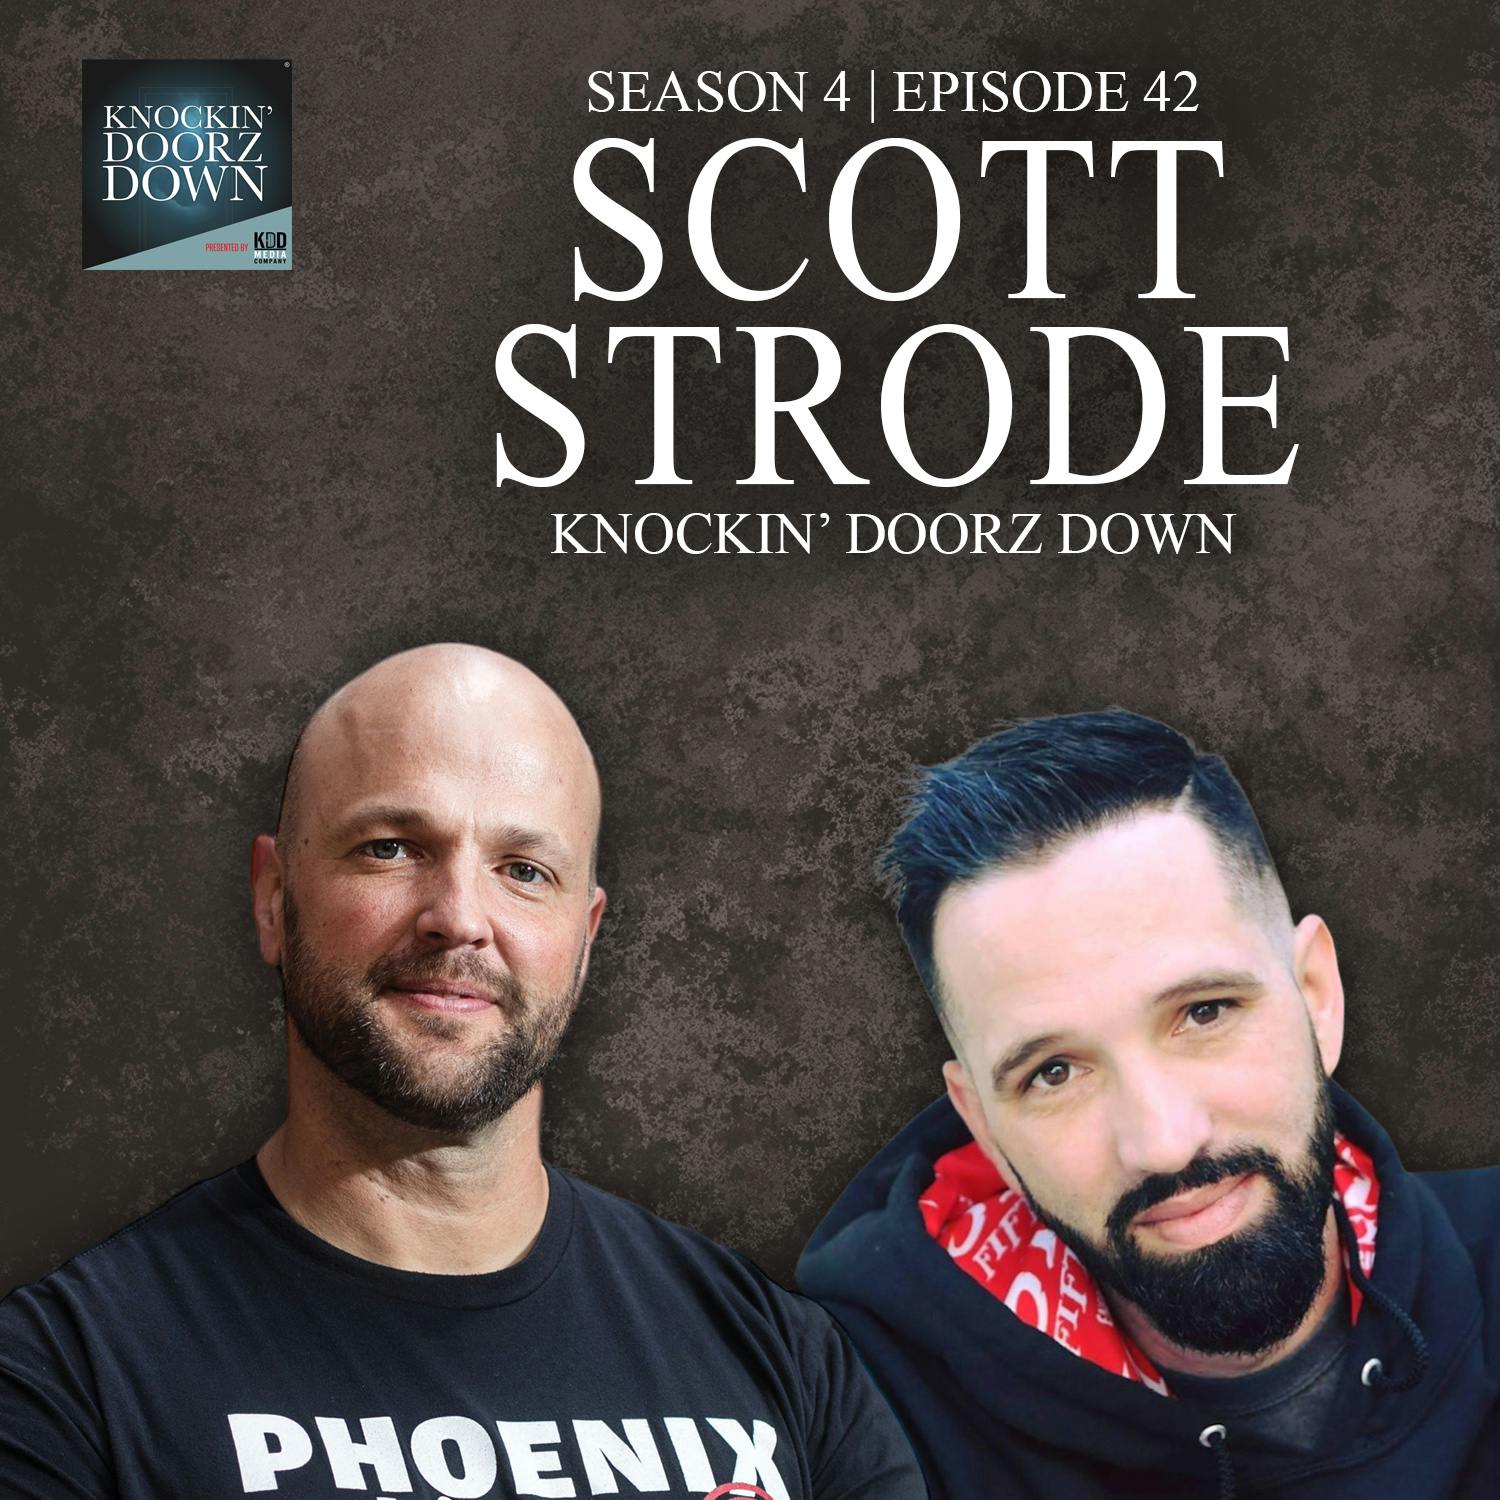 Rising From The Ashes Of Addiction, Fitness Aiding Sobriety & Creating The Phoenix With Scott Strode